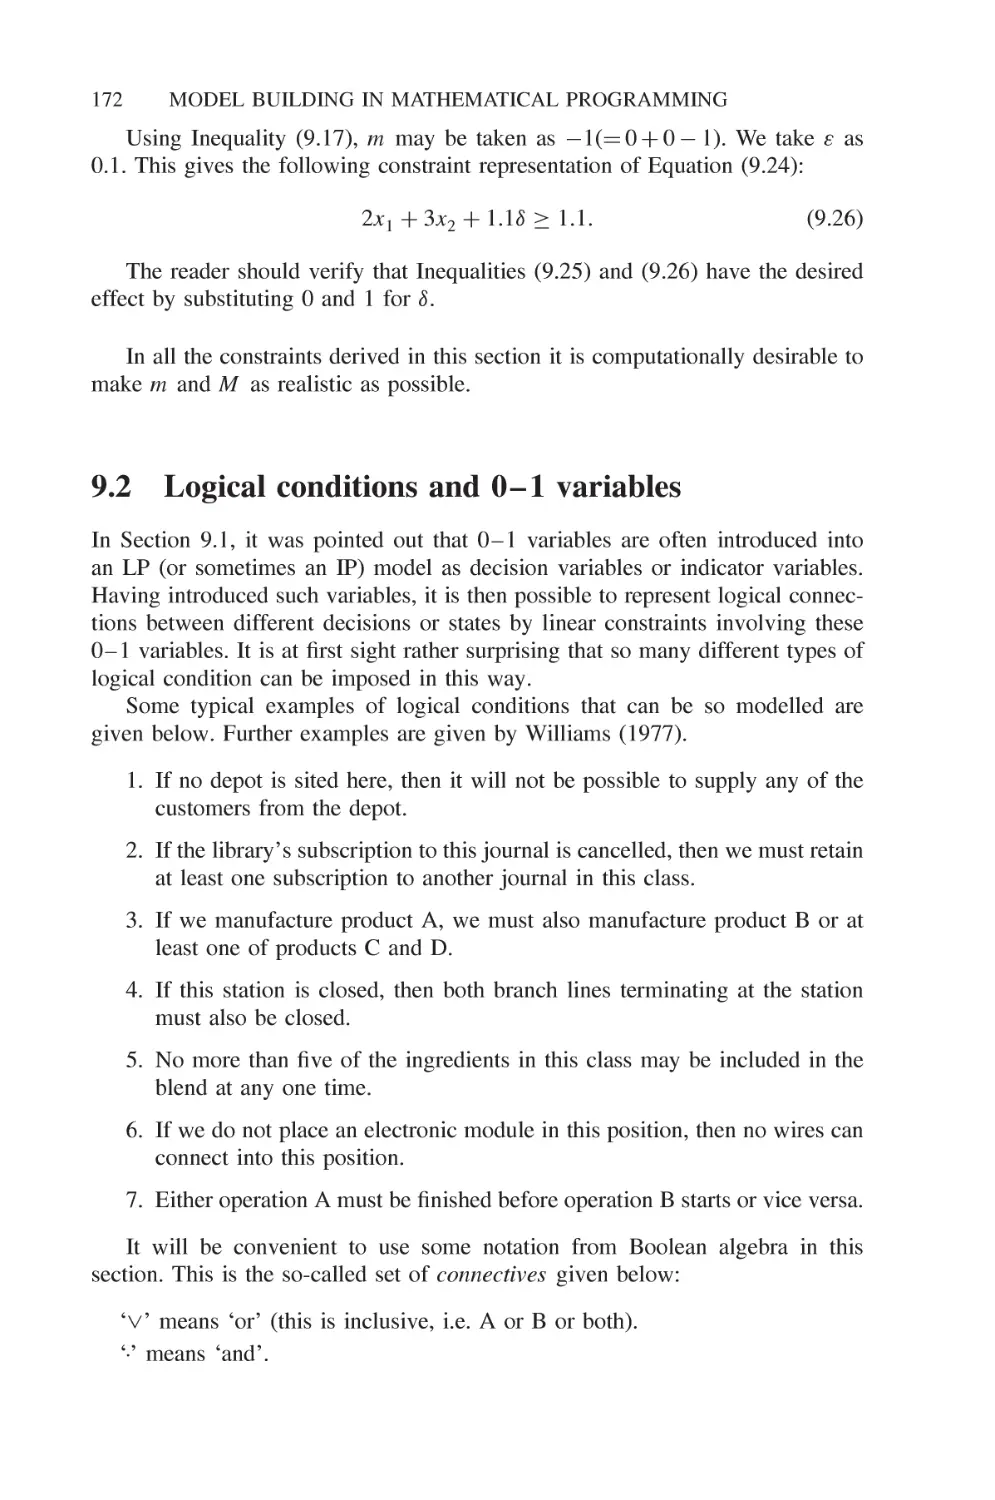 9.2 Logical conditions and 0-1 variables